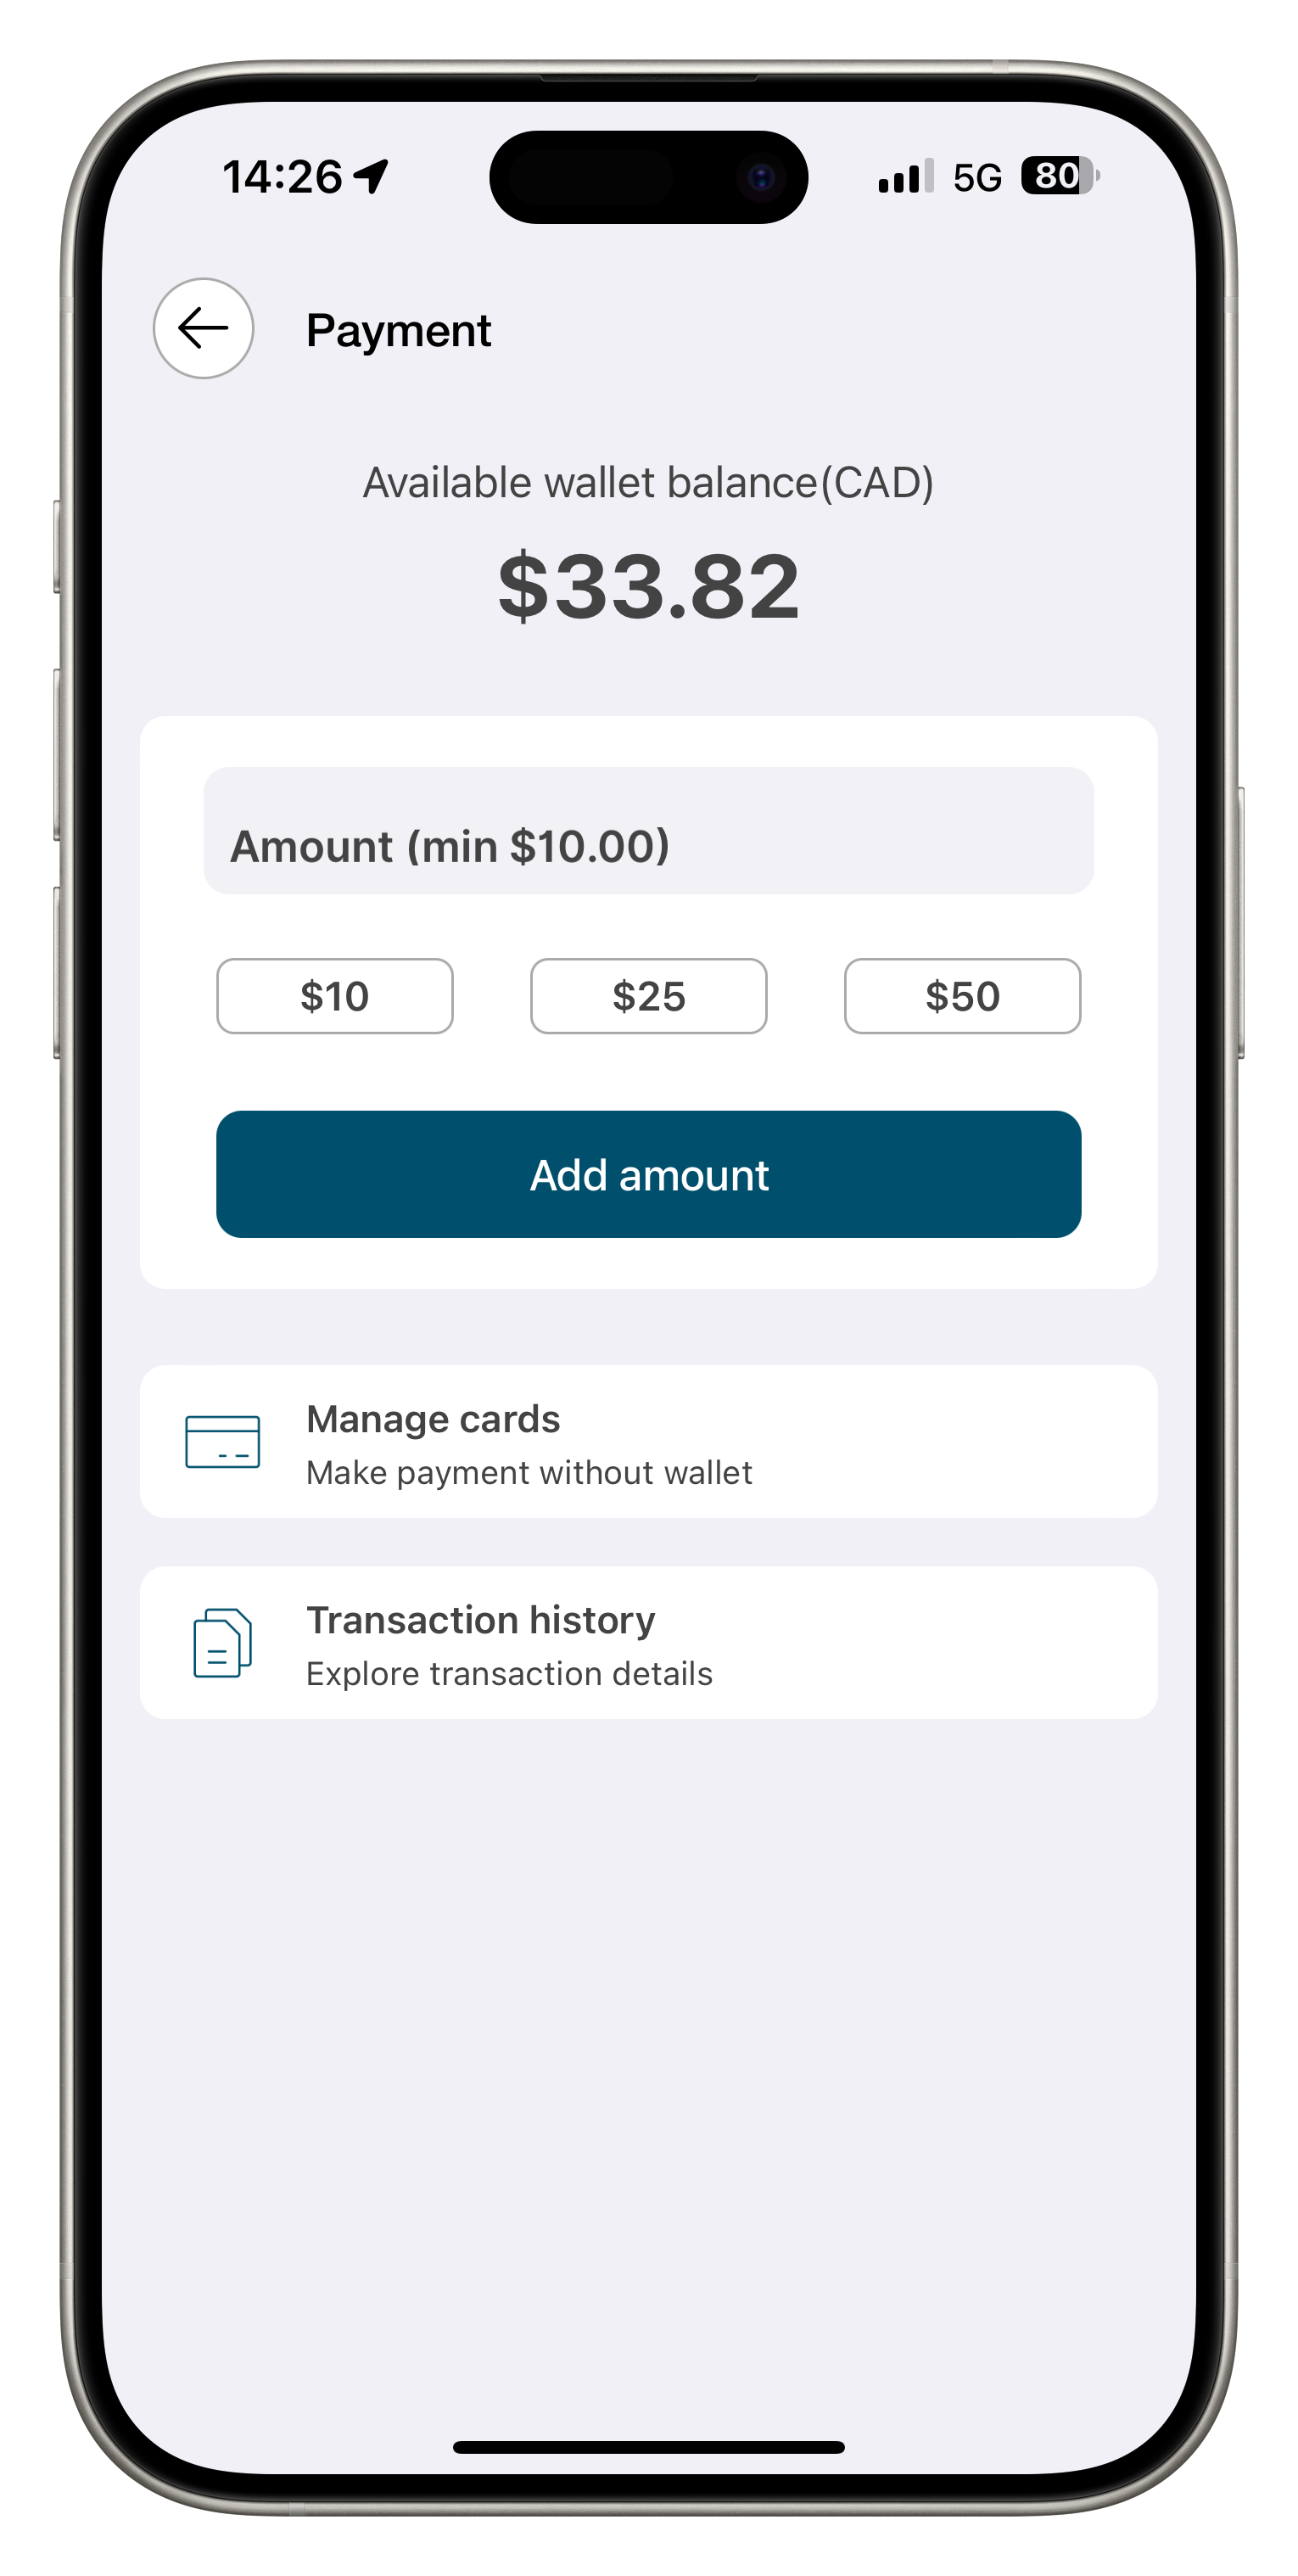 The mobile app screen when adding funds.